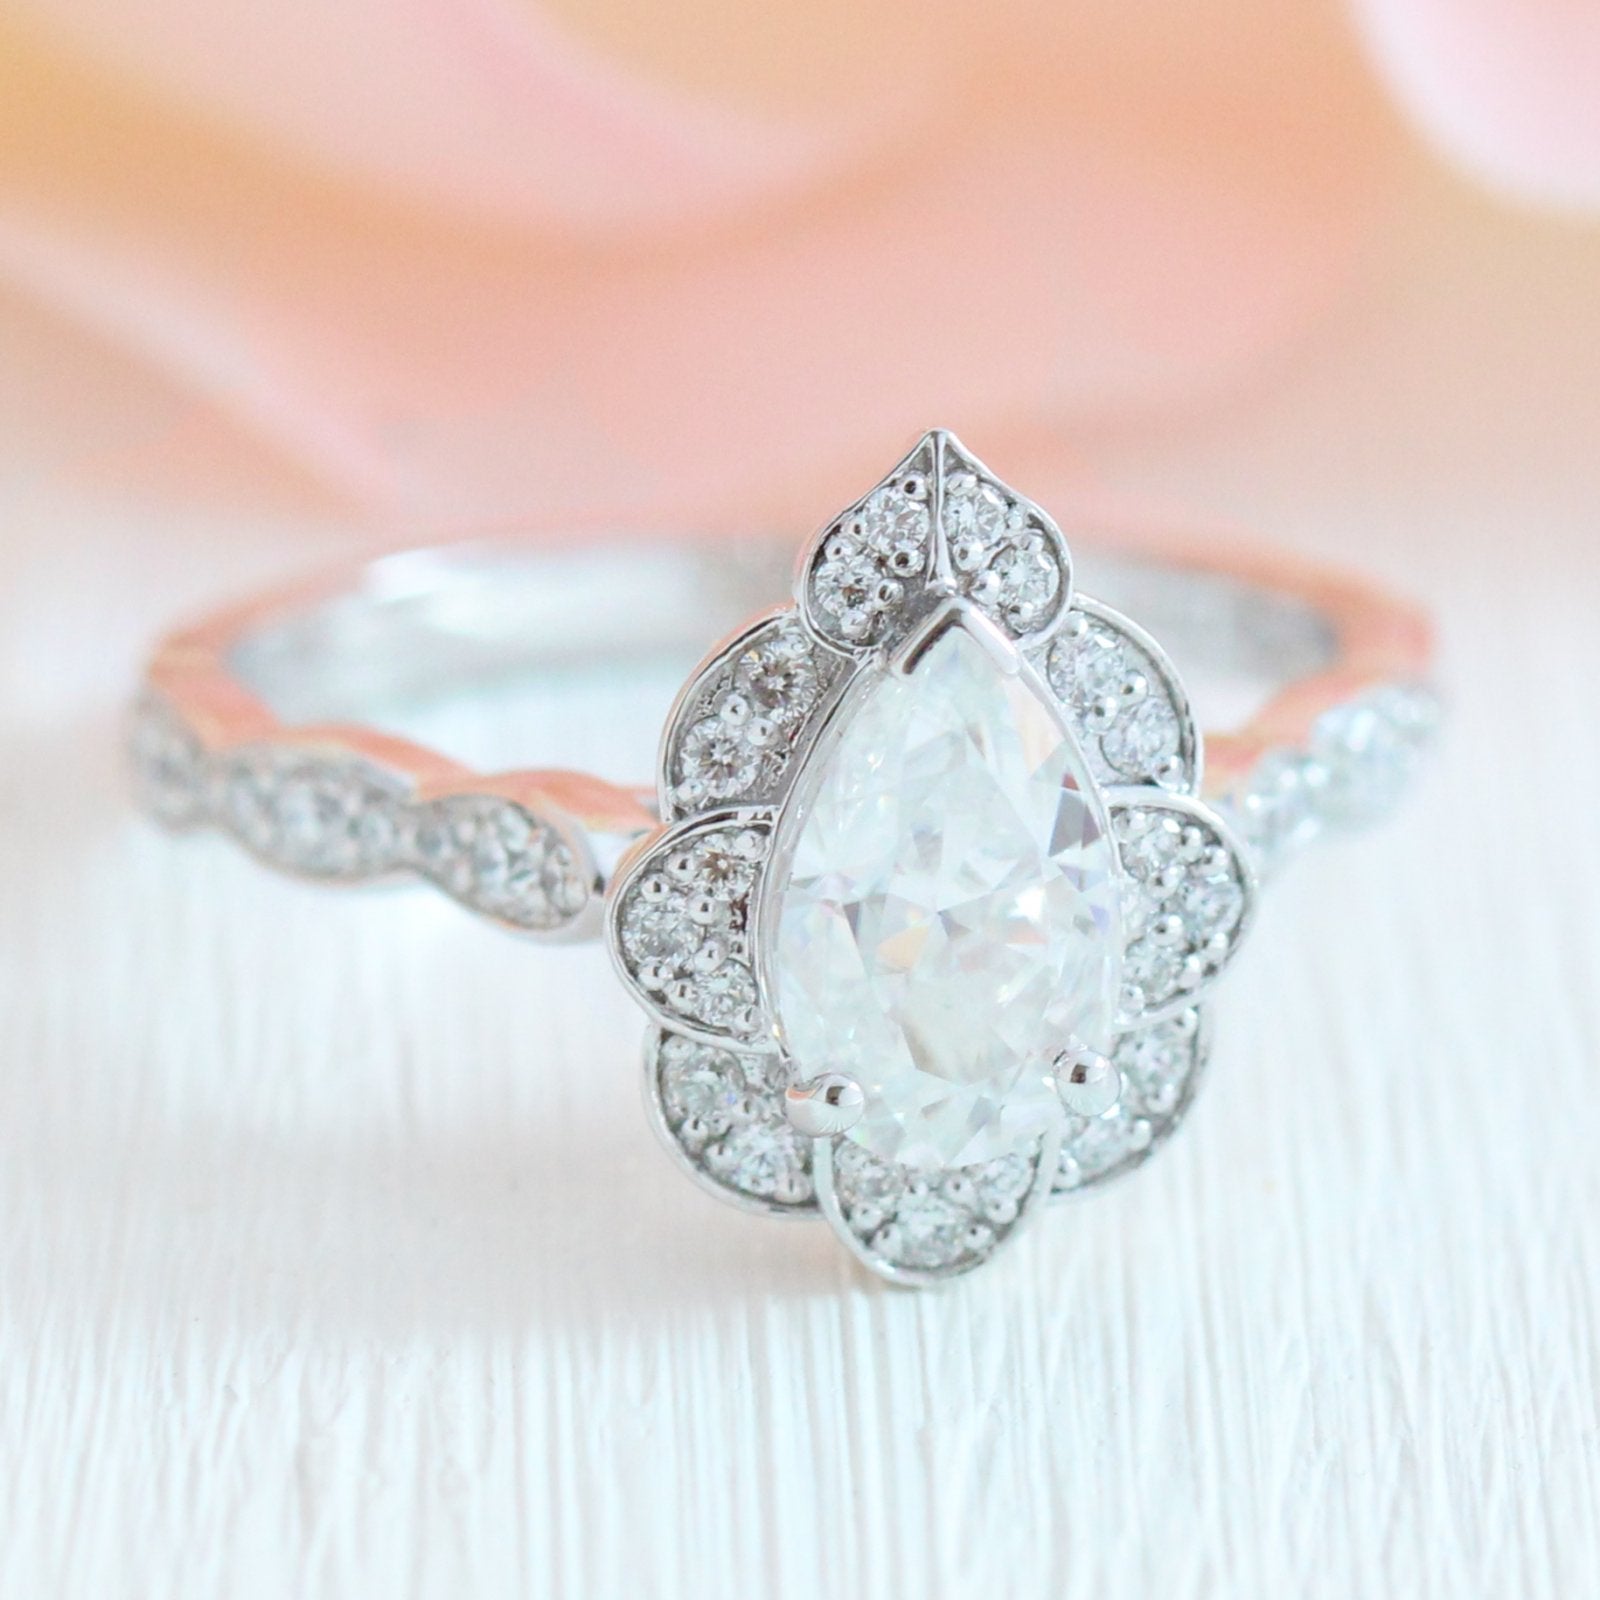 Classic Pear Shaped Halo Engagement Ring in White Gold